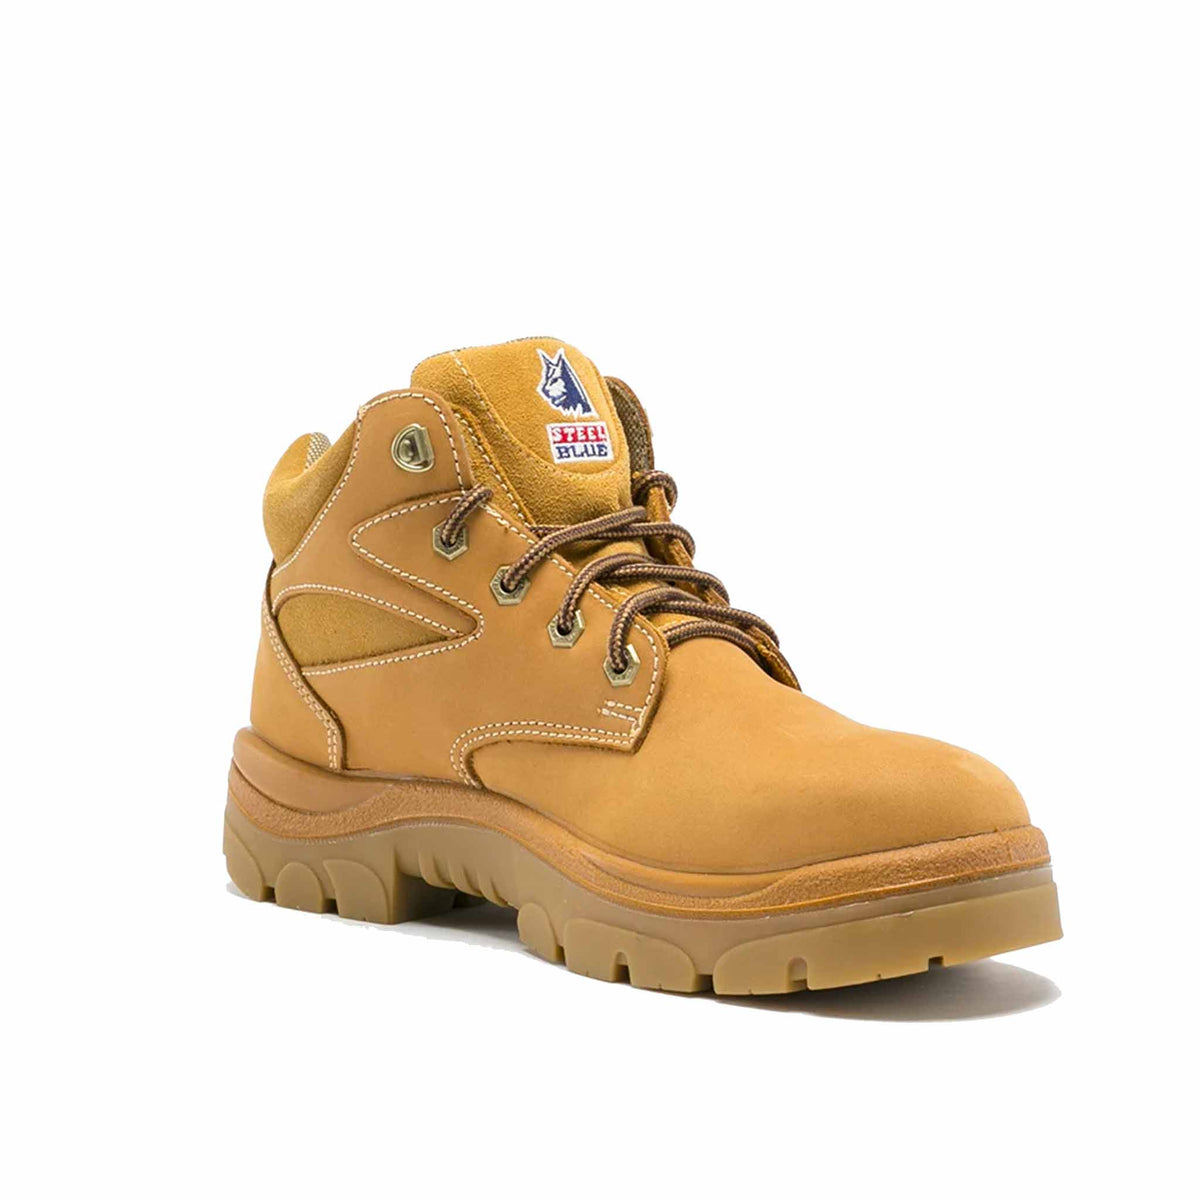 wheat whyalla steel cap hiker boot